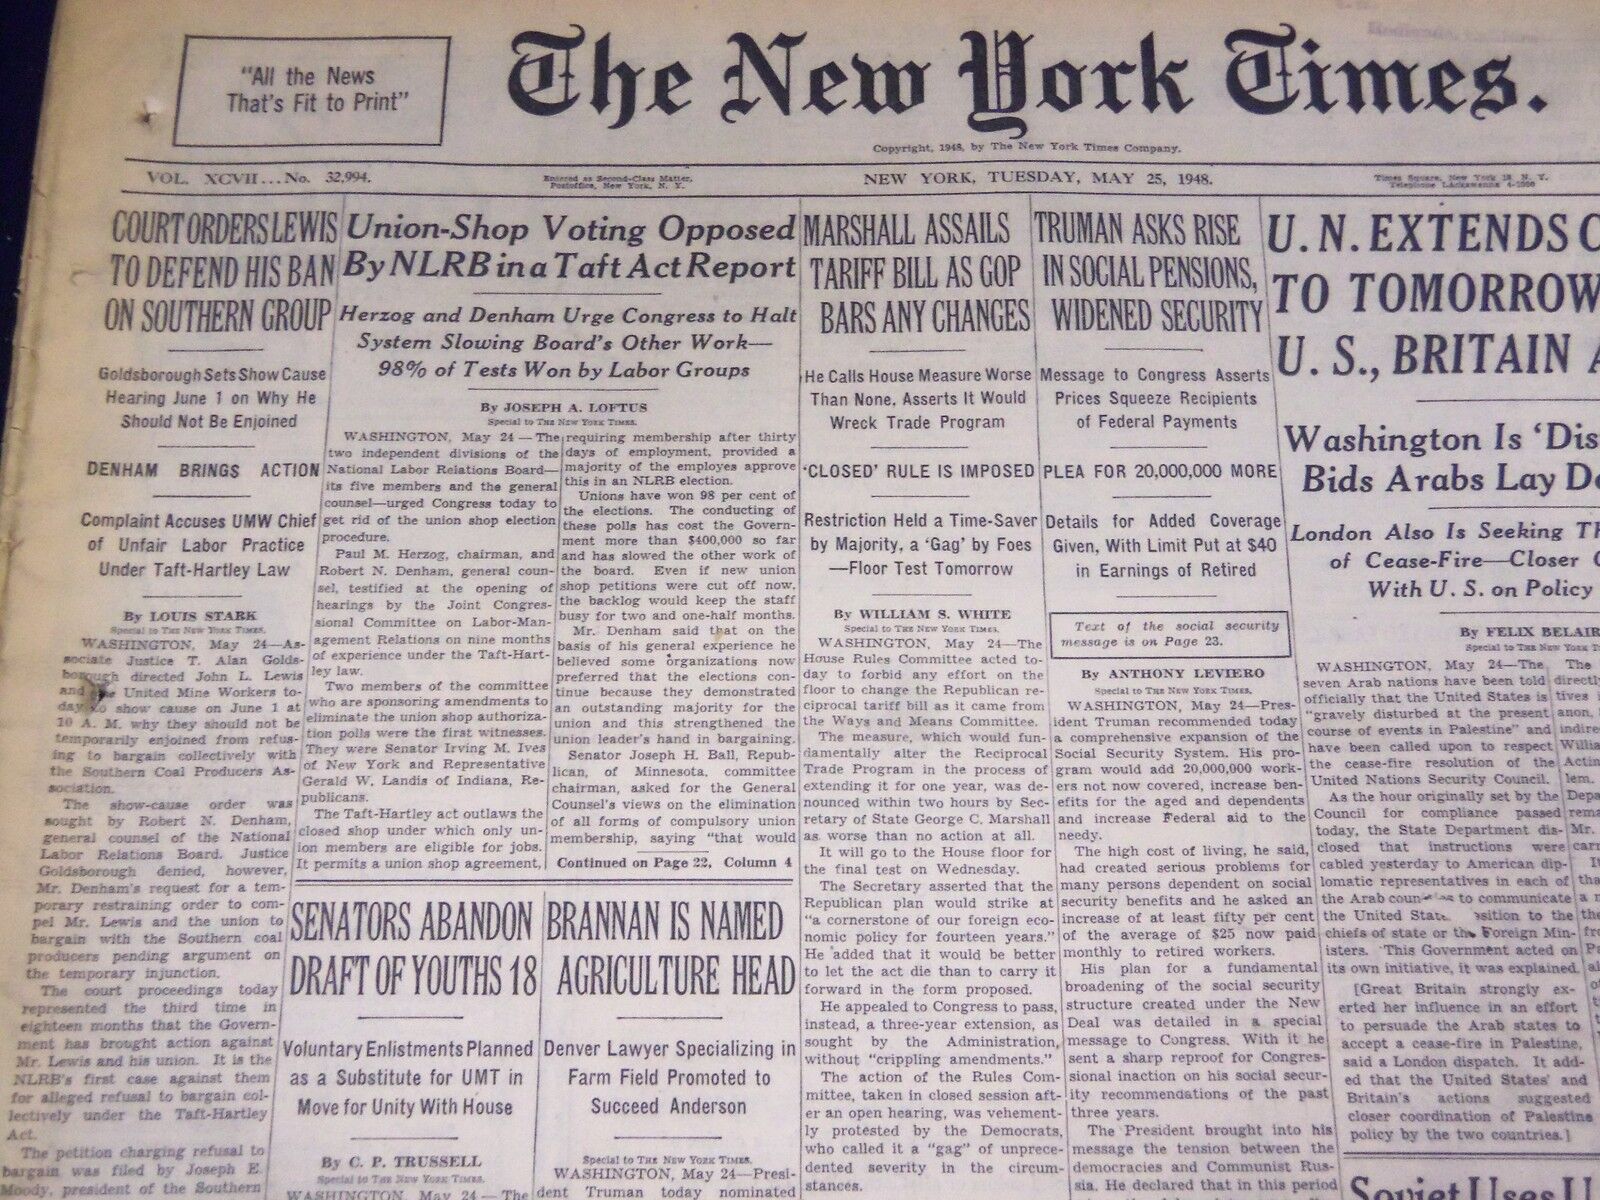 1948 MAY 25 NEW YORK TIMES - COURT ORDERS LEWIS TO DEFEND BAN - NT 3632